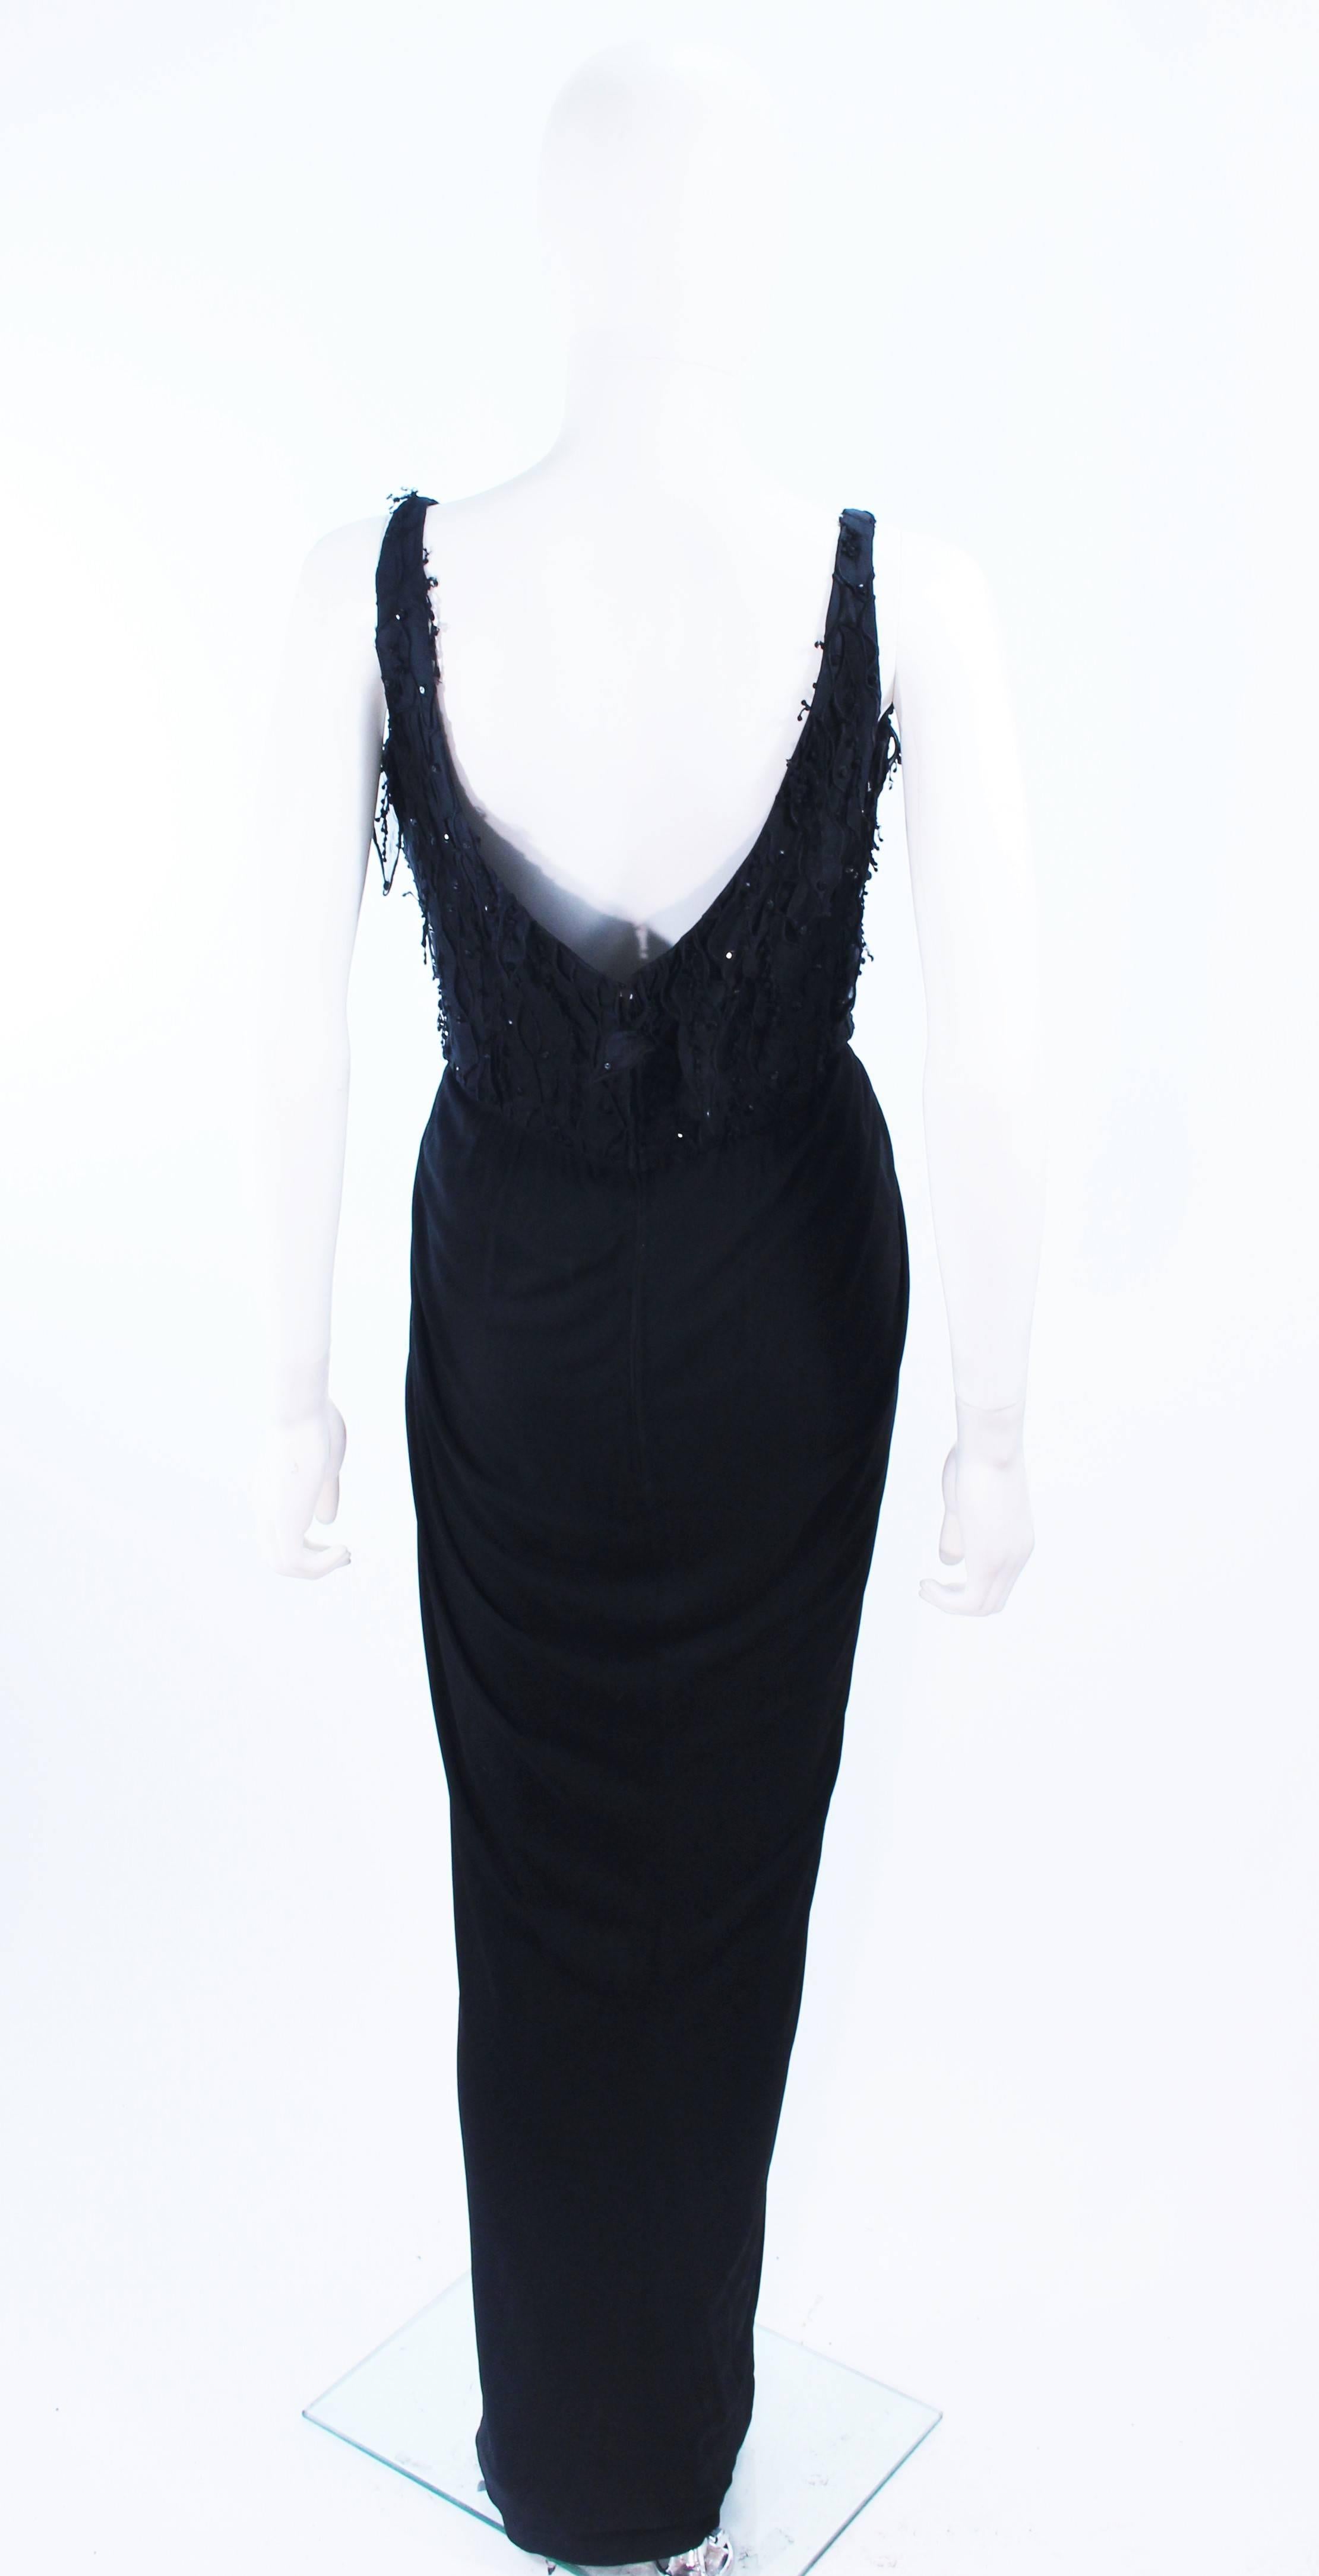 Vintage 1960's Black Silk Jersey Gown with Floral Applique & Rhinestones Size 4 For Sale 6